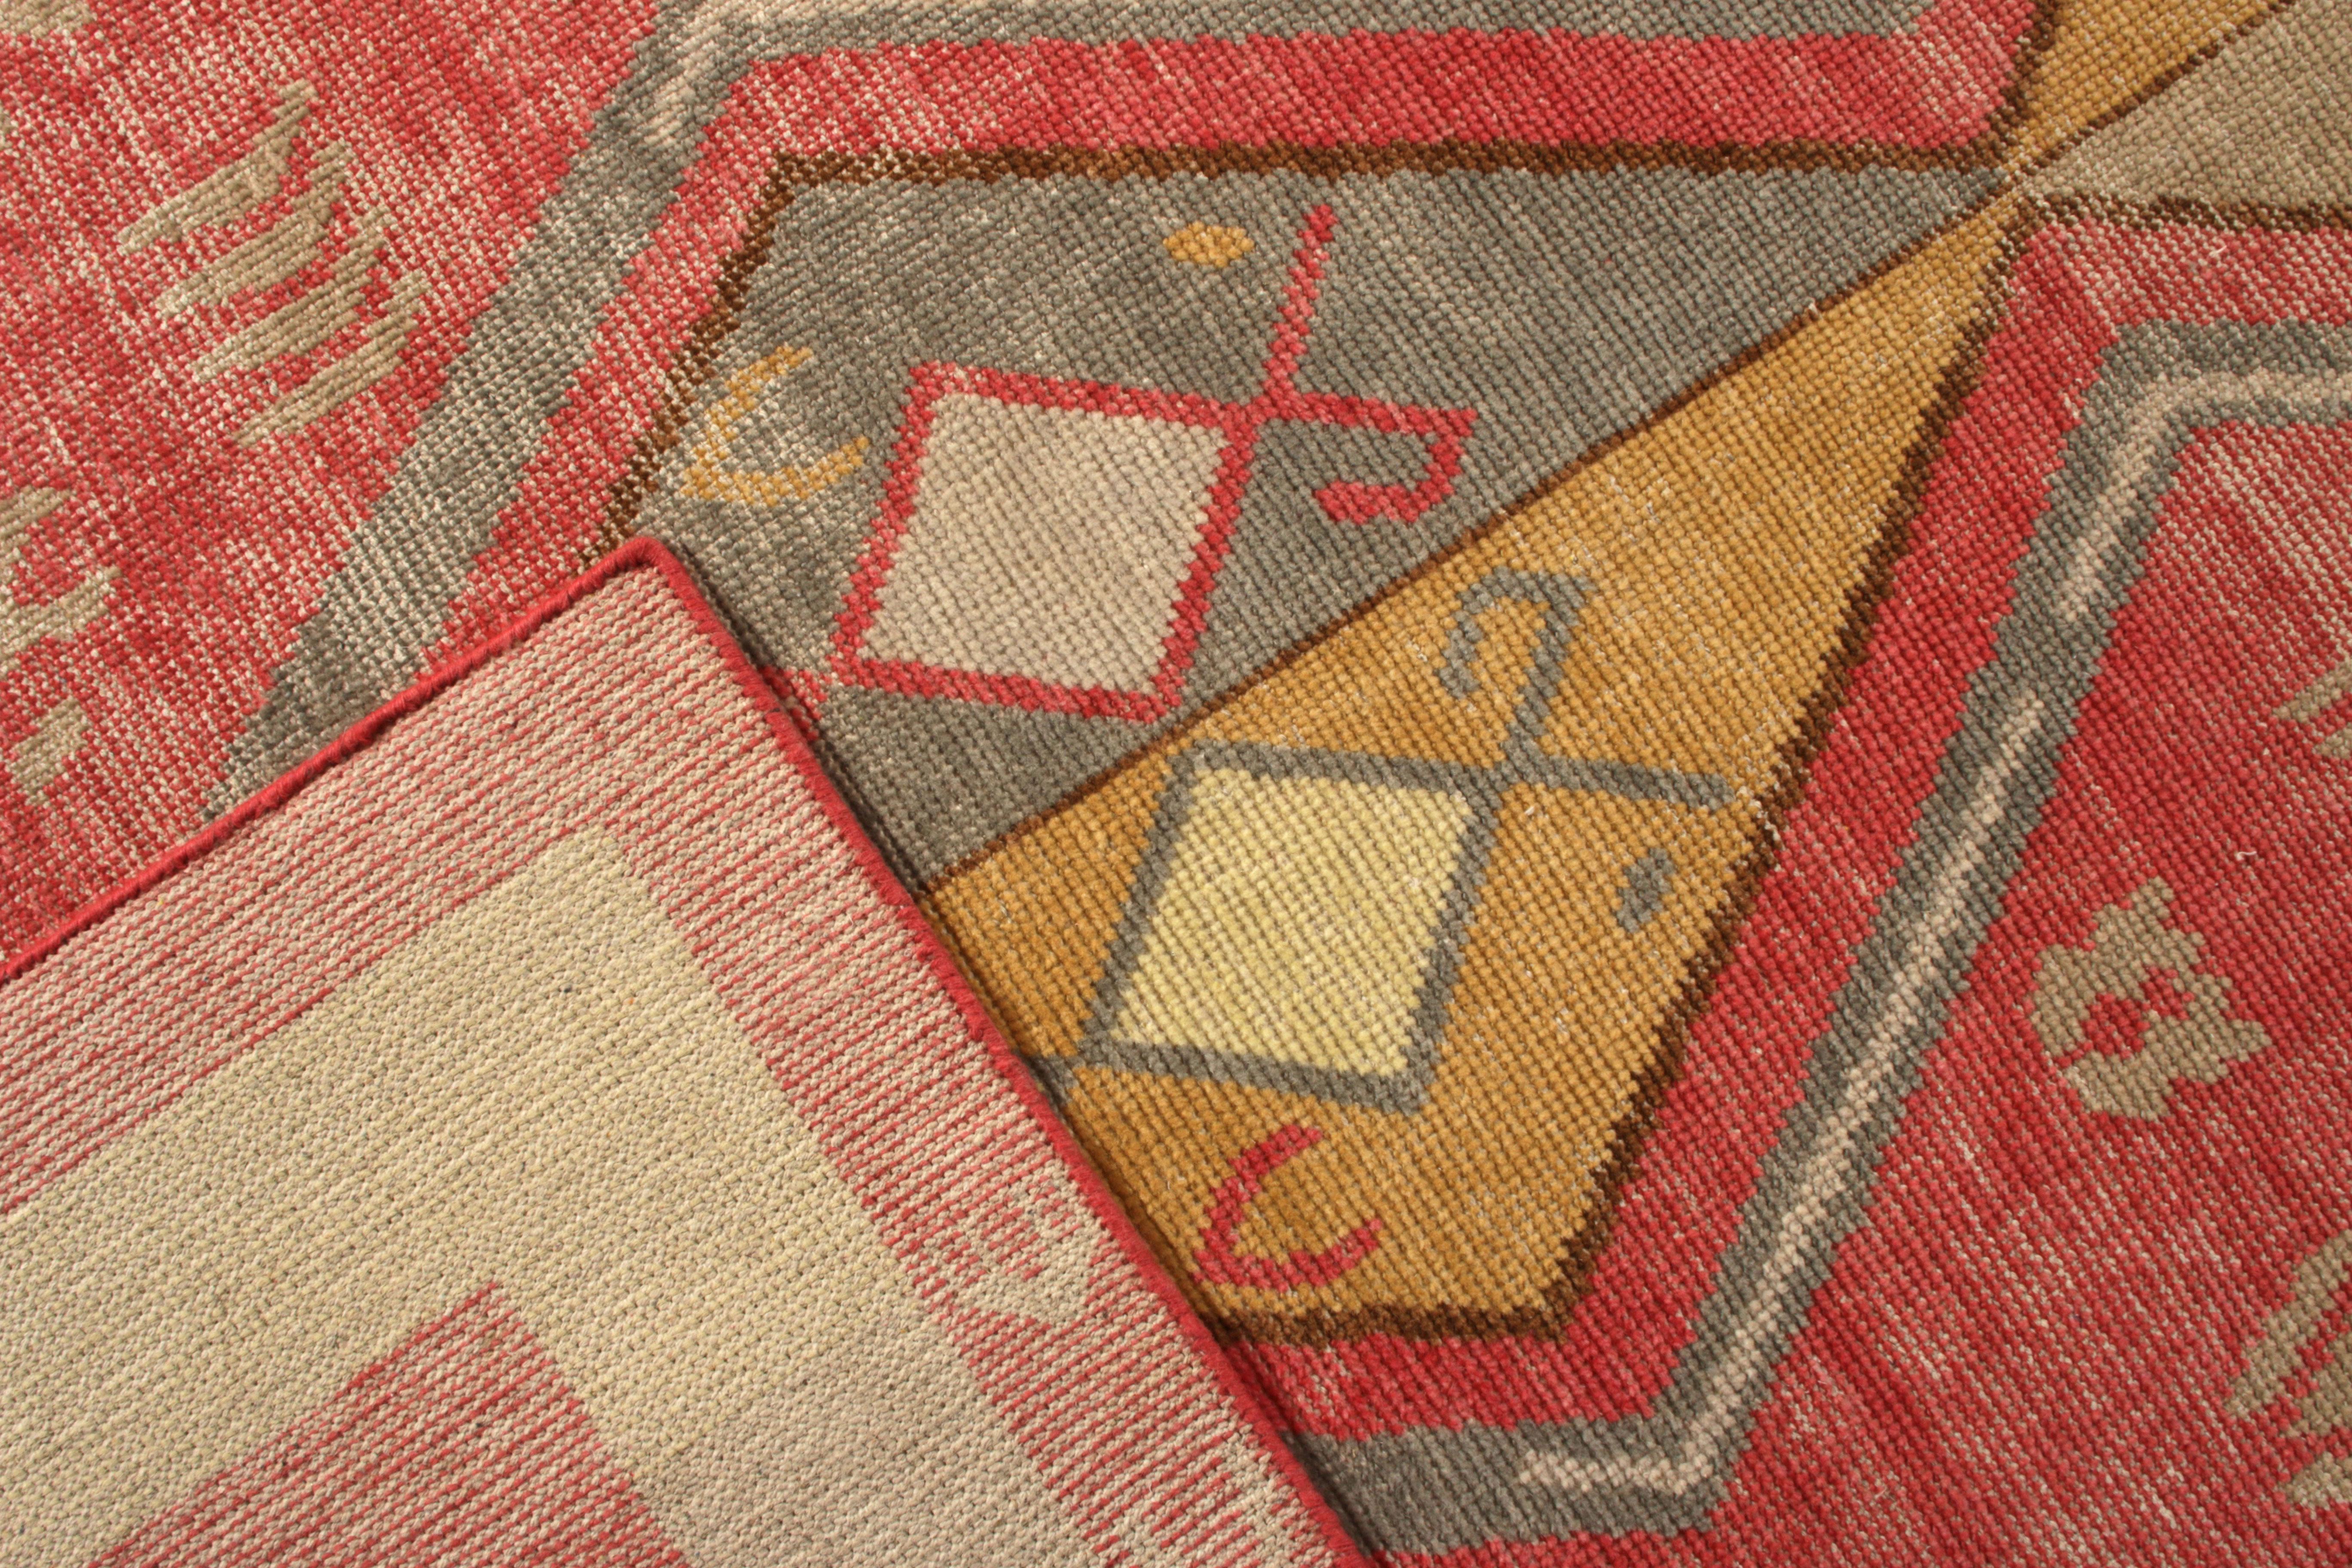 Wool Rug & Kilim's Hand-Knotted Tribal-Style Rug, Red Gold Diamond Pattern